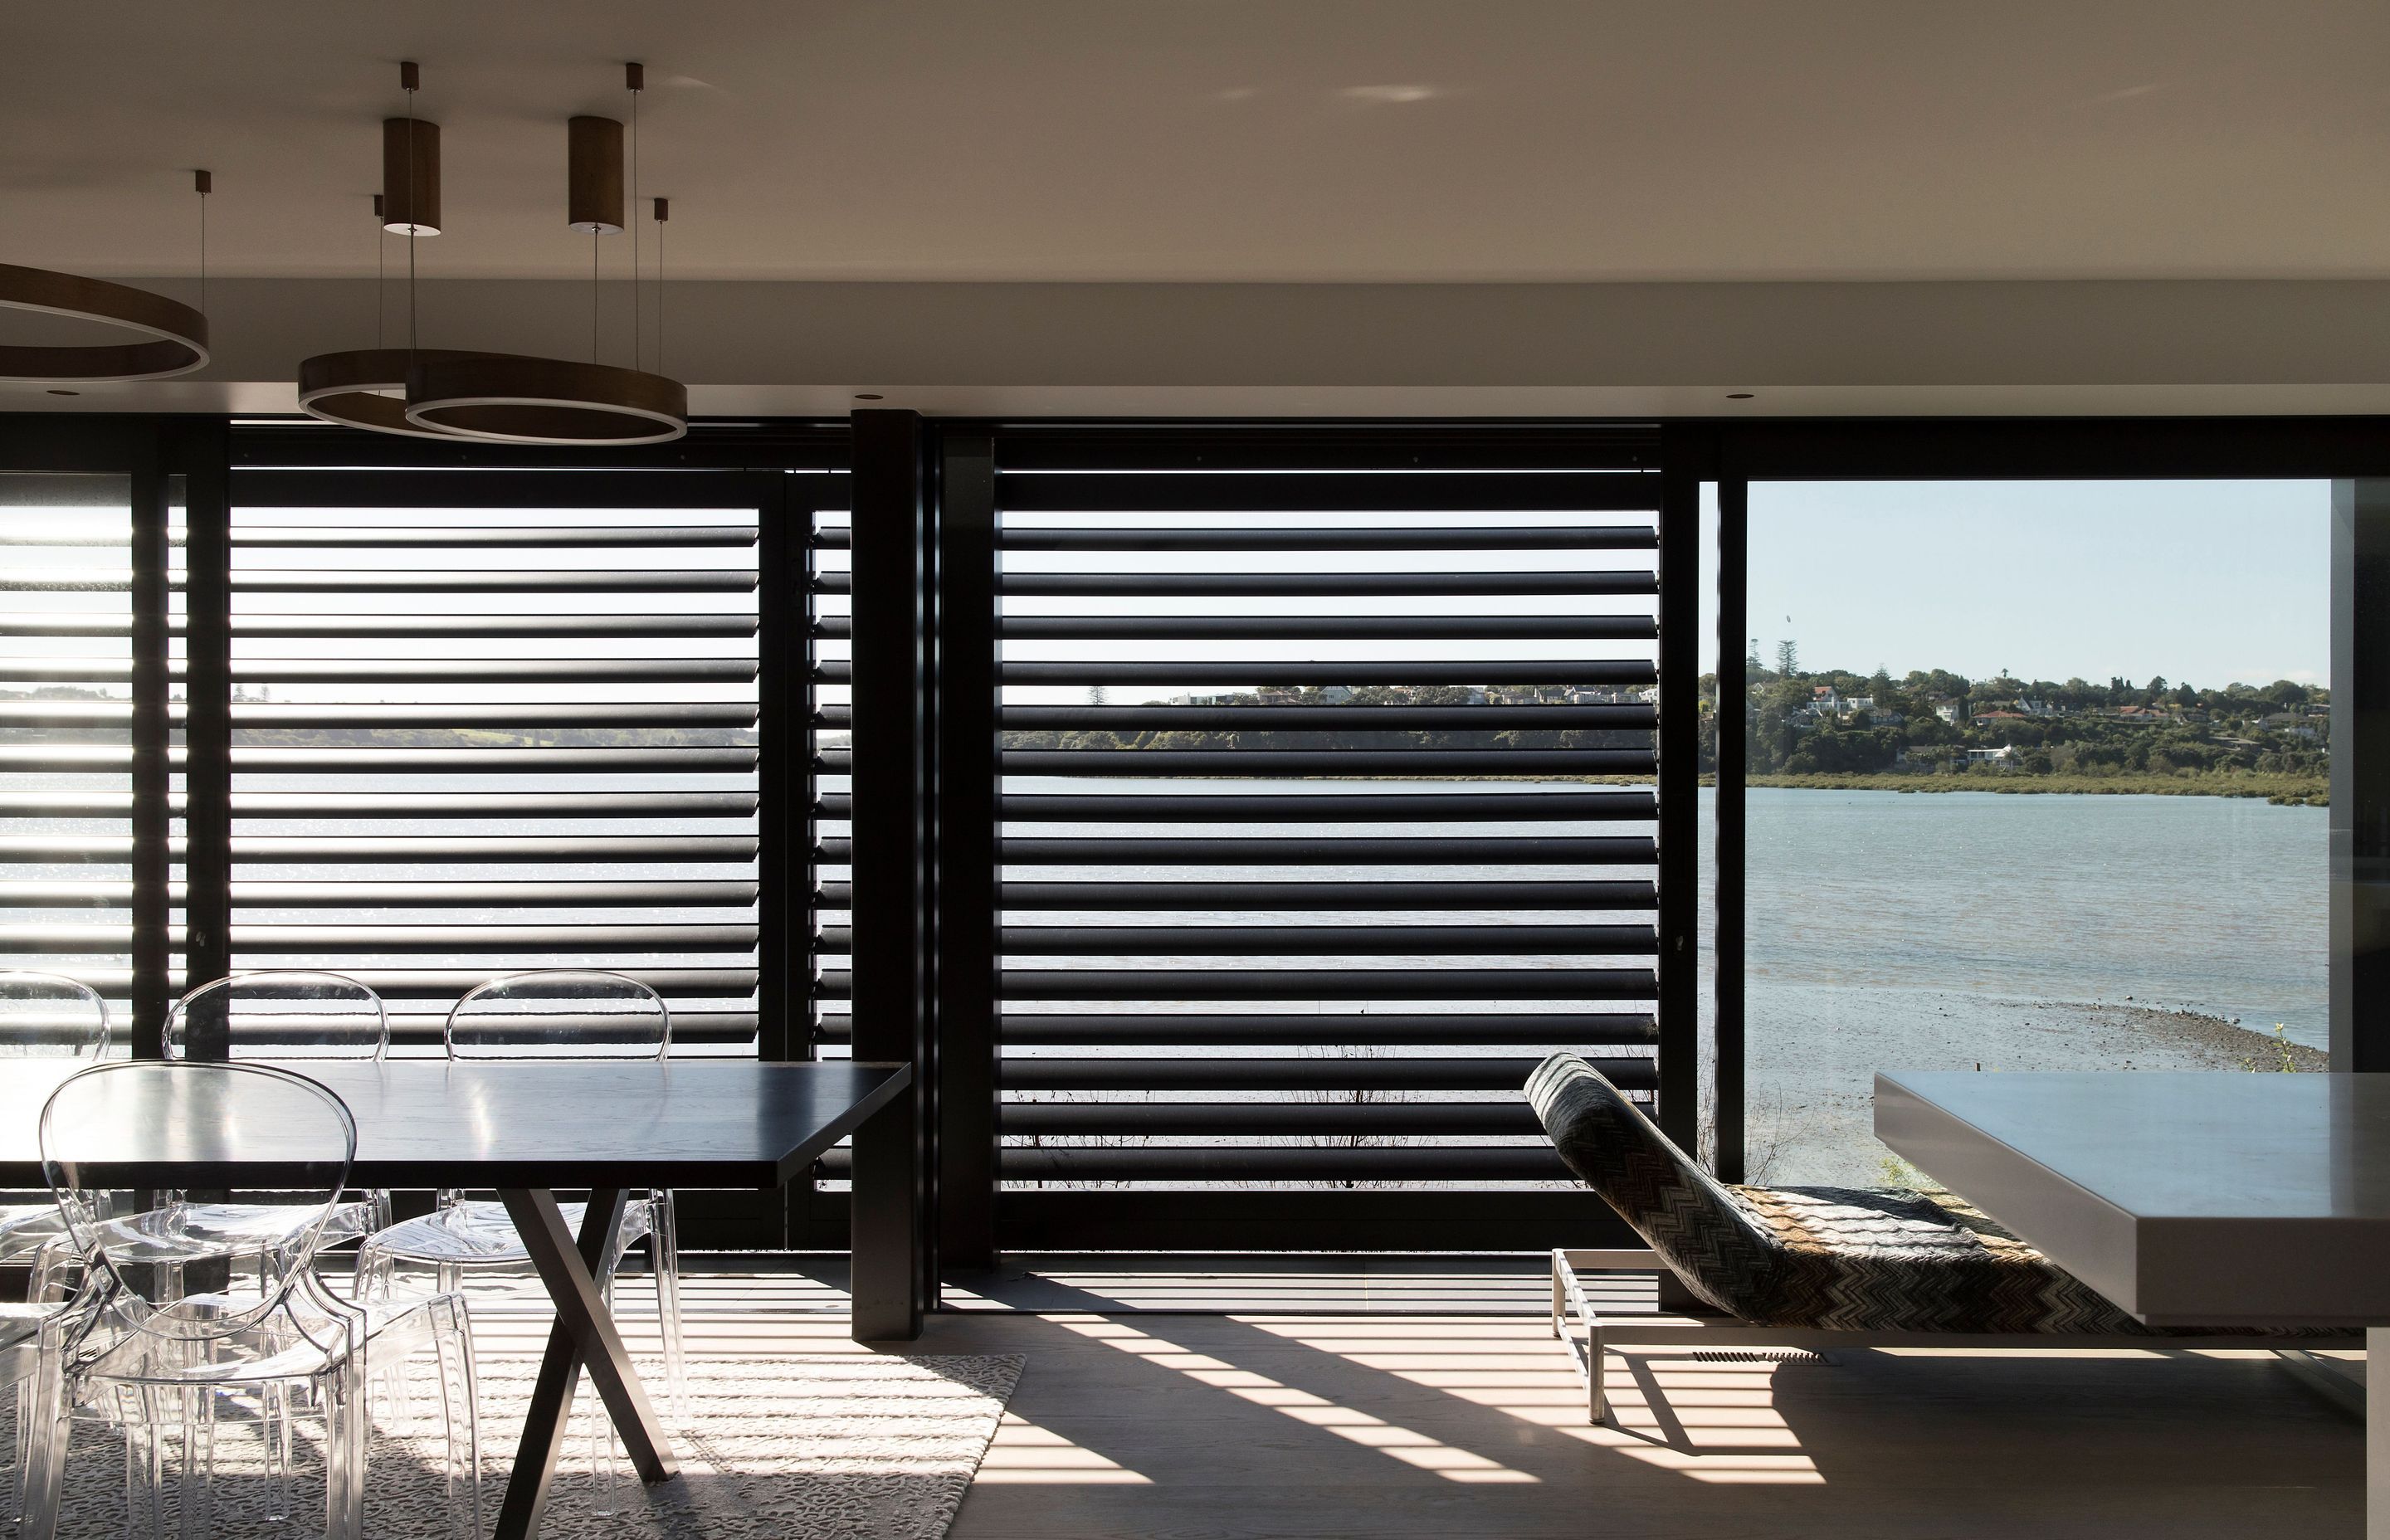 Louves help to shade the interior from the northern sunlight and create a horizontal pinstriped effect on the exterior and in the shadows cast on the floor.